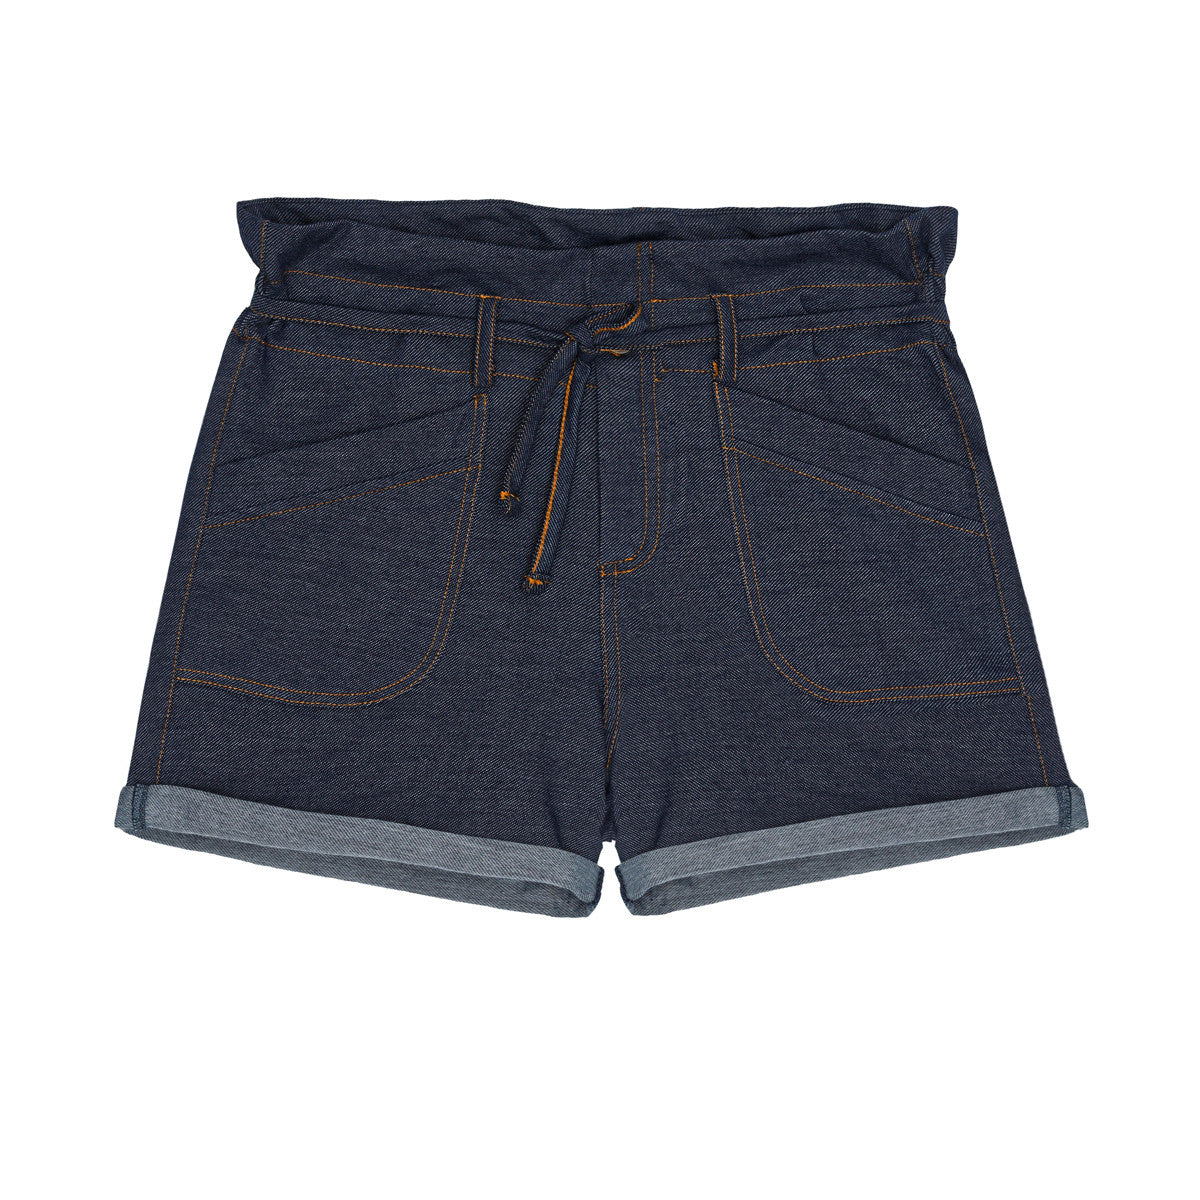 Little Hedonist shorts for girls in dark denim. Kids clothing made from organic cotton. Sustainable, super soft and easy to wear!